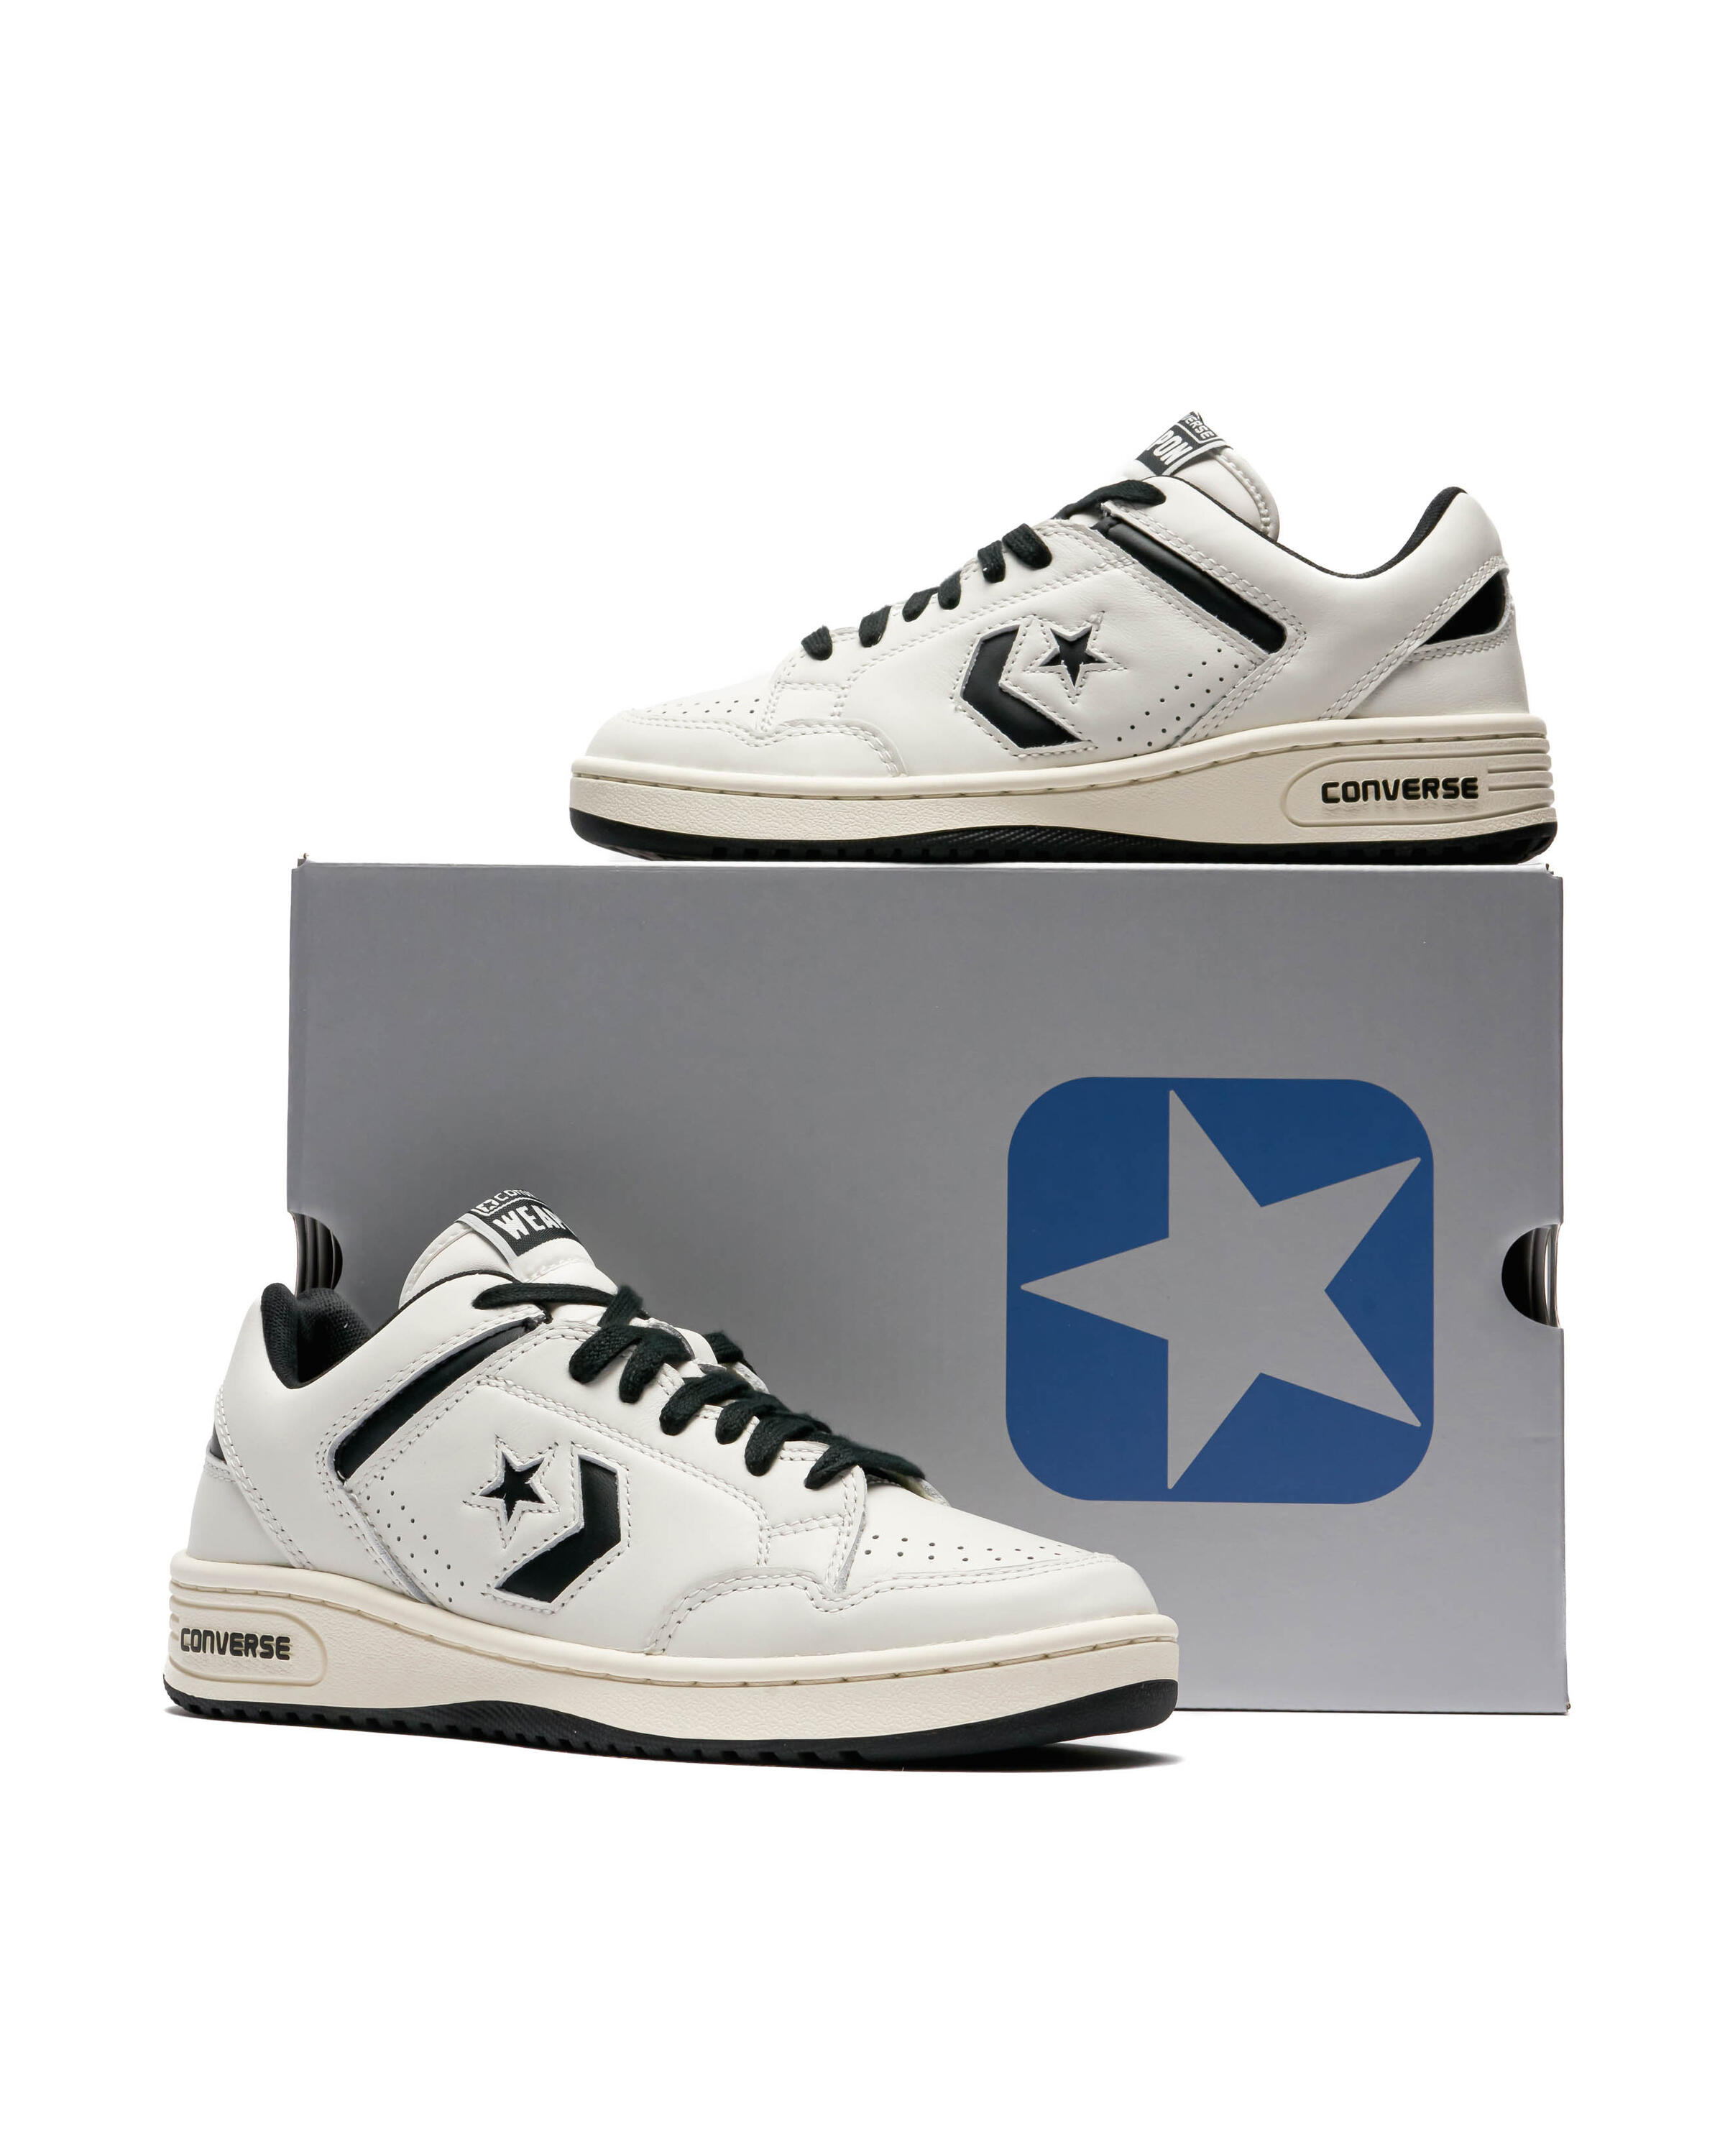 Converse x OLD MONEY WEAPON LOW OX